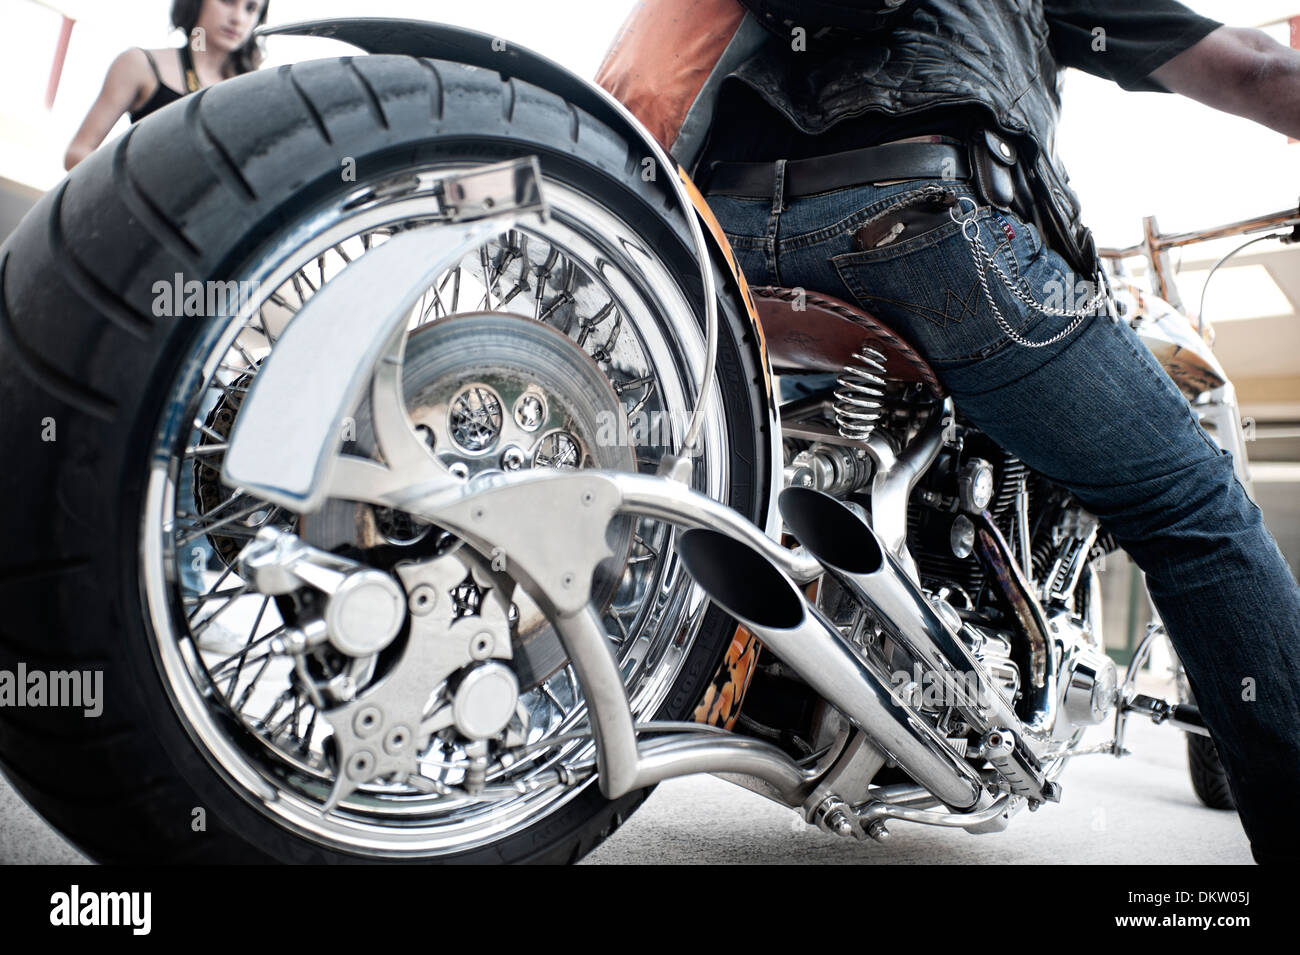 Motorcycles parked in a Harley Davidson event Stock Photo